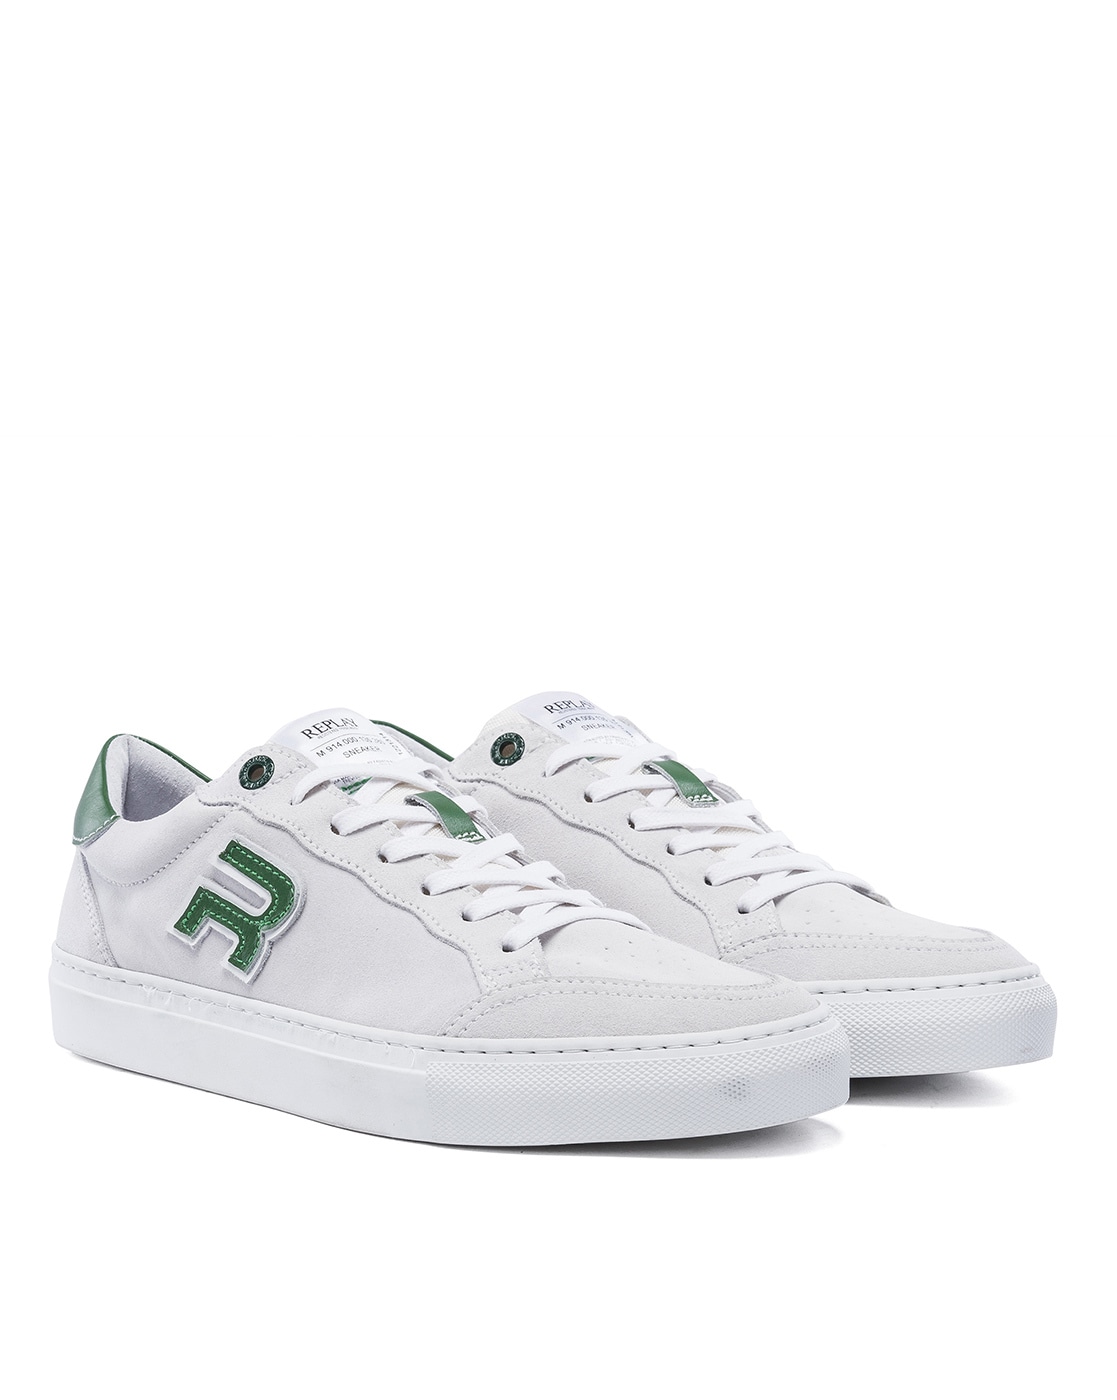 white sneakers online